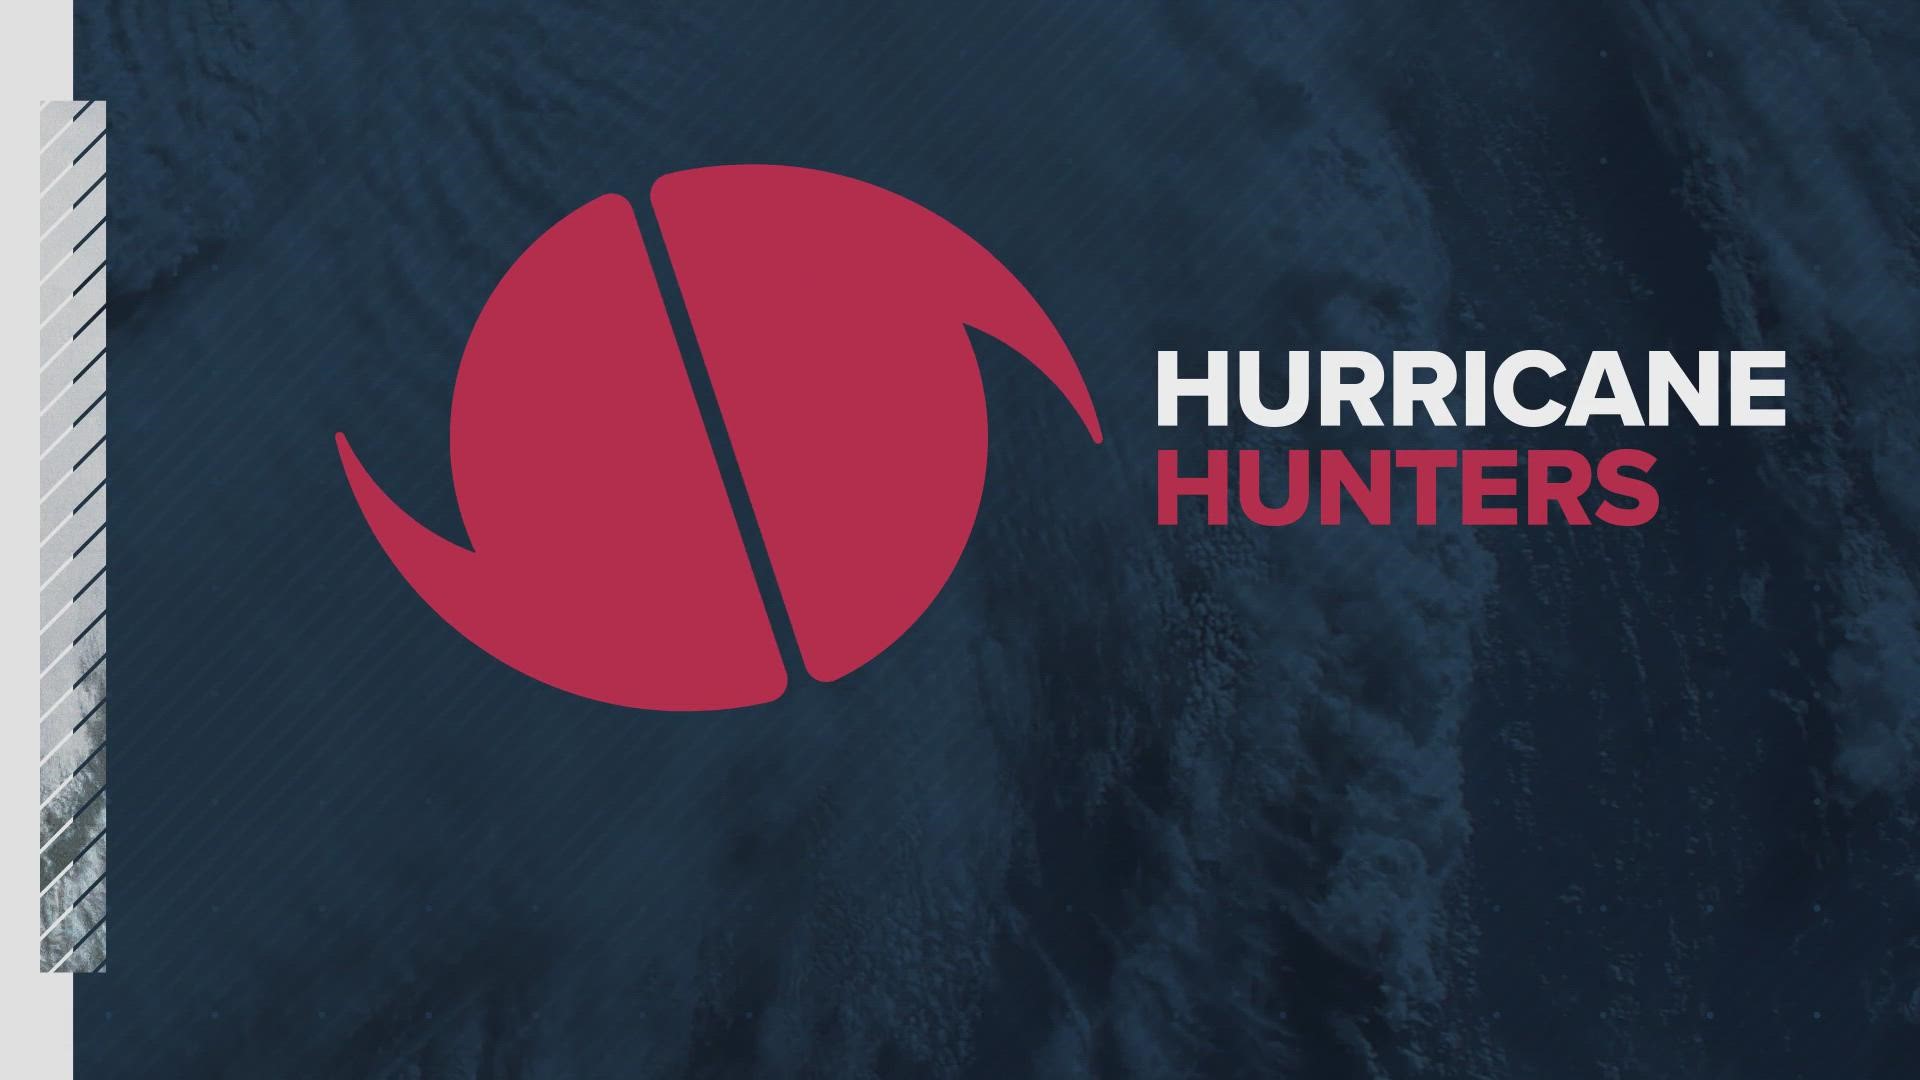 Hurricane Hunters collect a lot of critical data during a storm, but how are they even getting there in the first place?